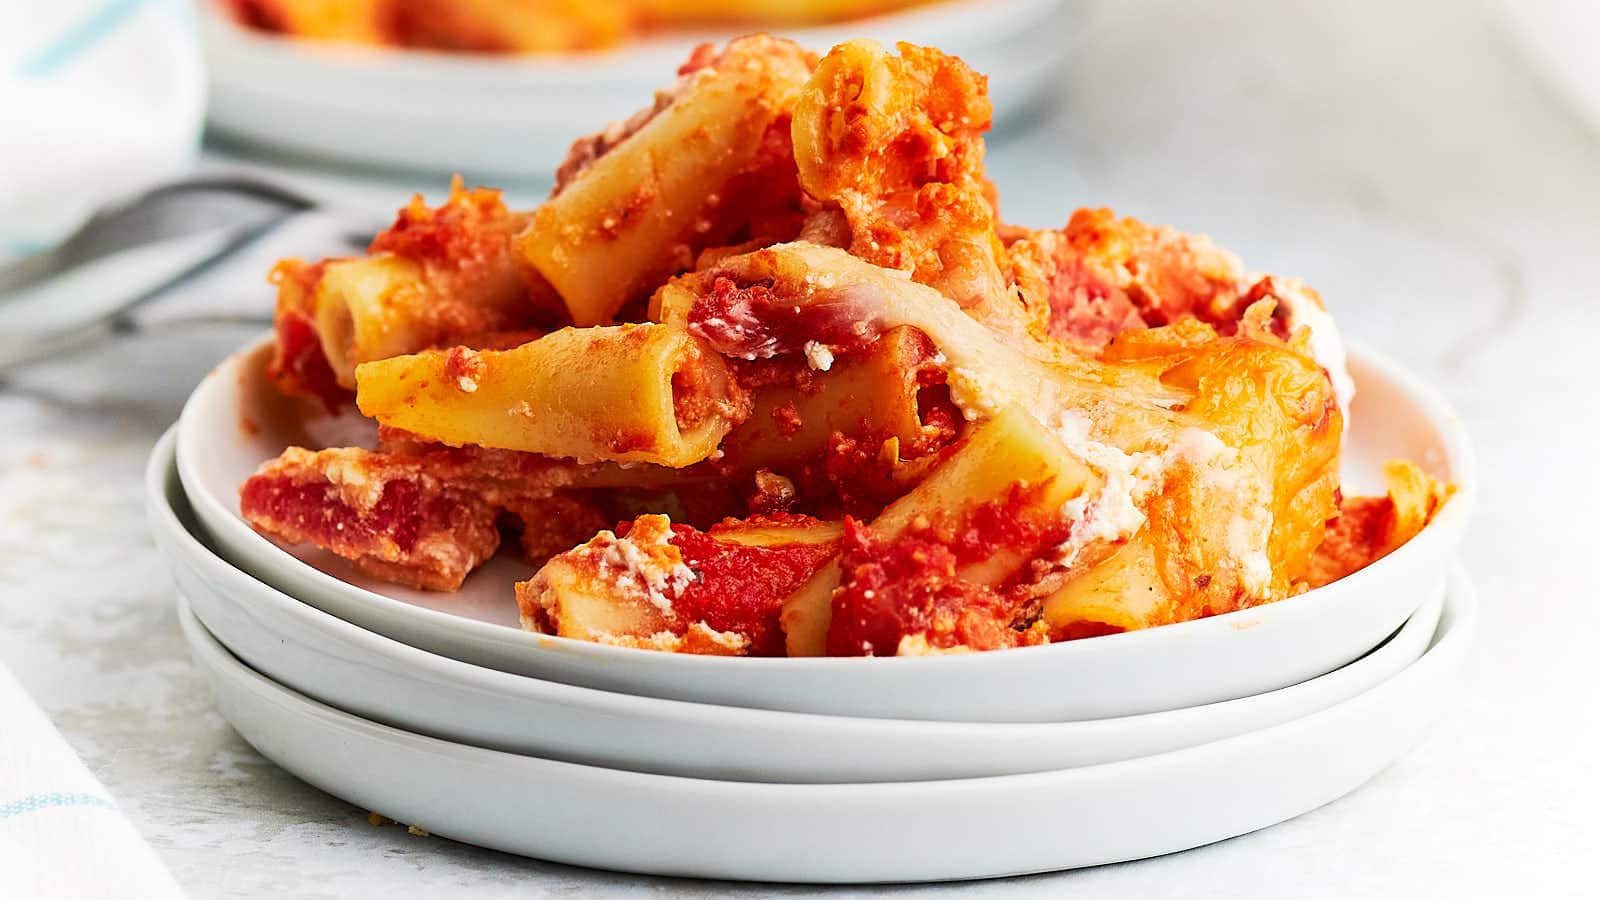 Baked Ziti recipe by Cheerful Cook.